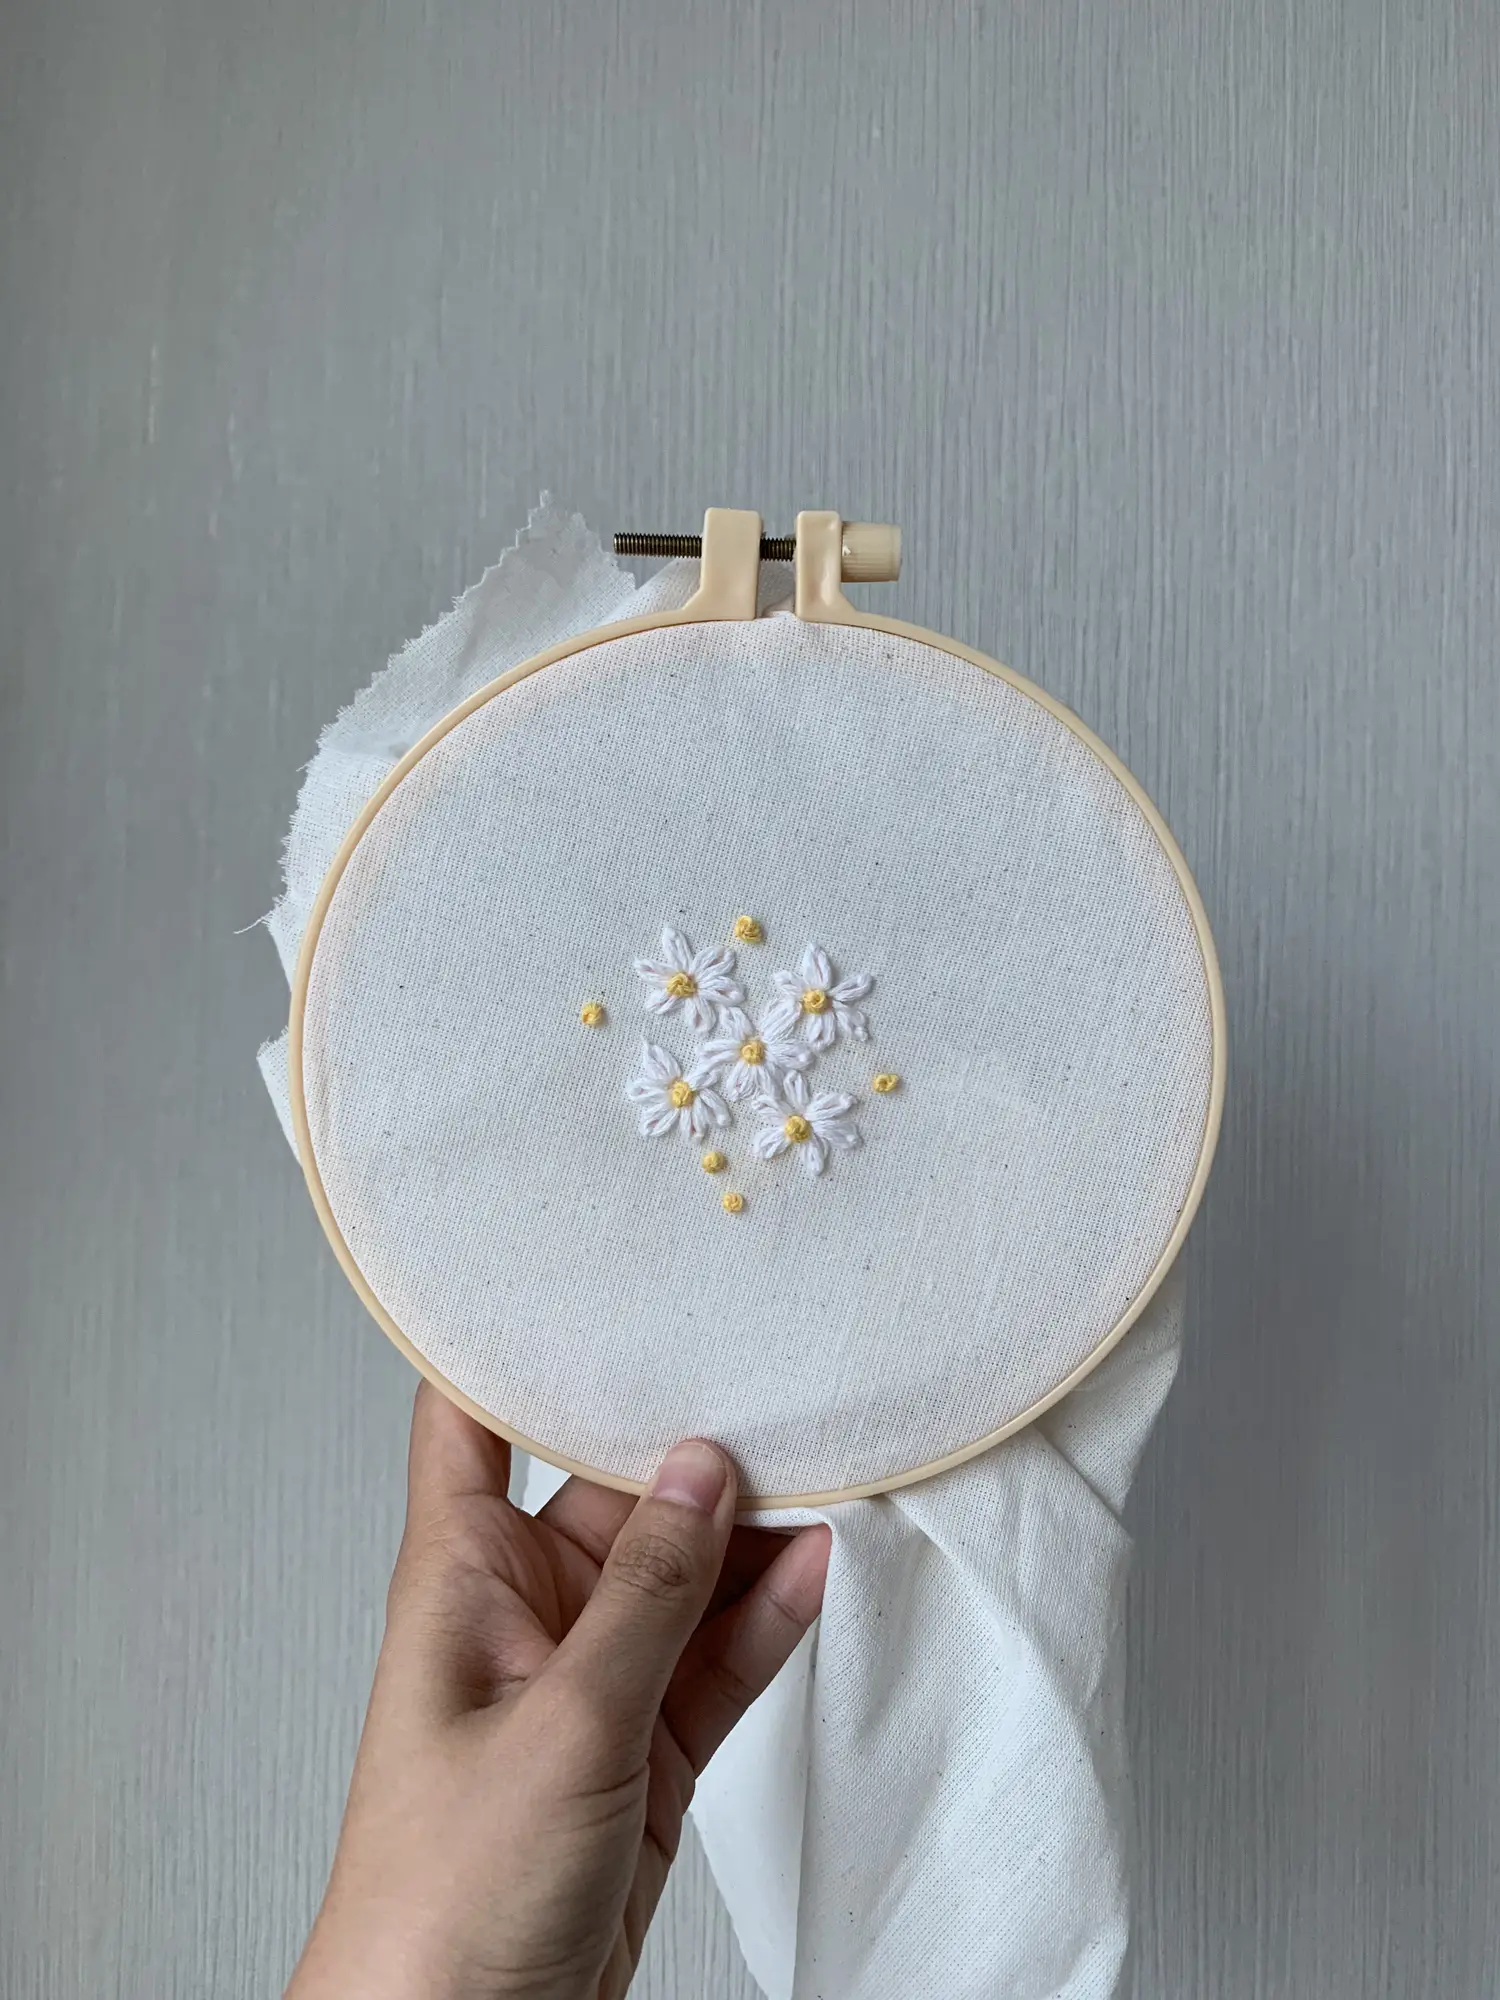 550 Best Embroidery Hoops Crafts ideas